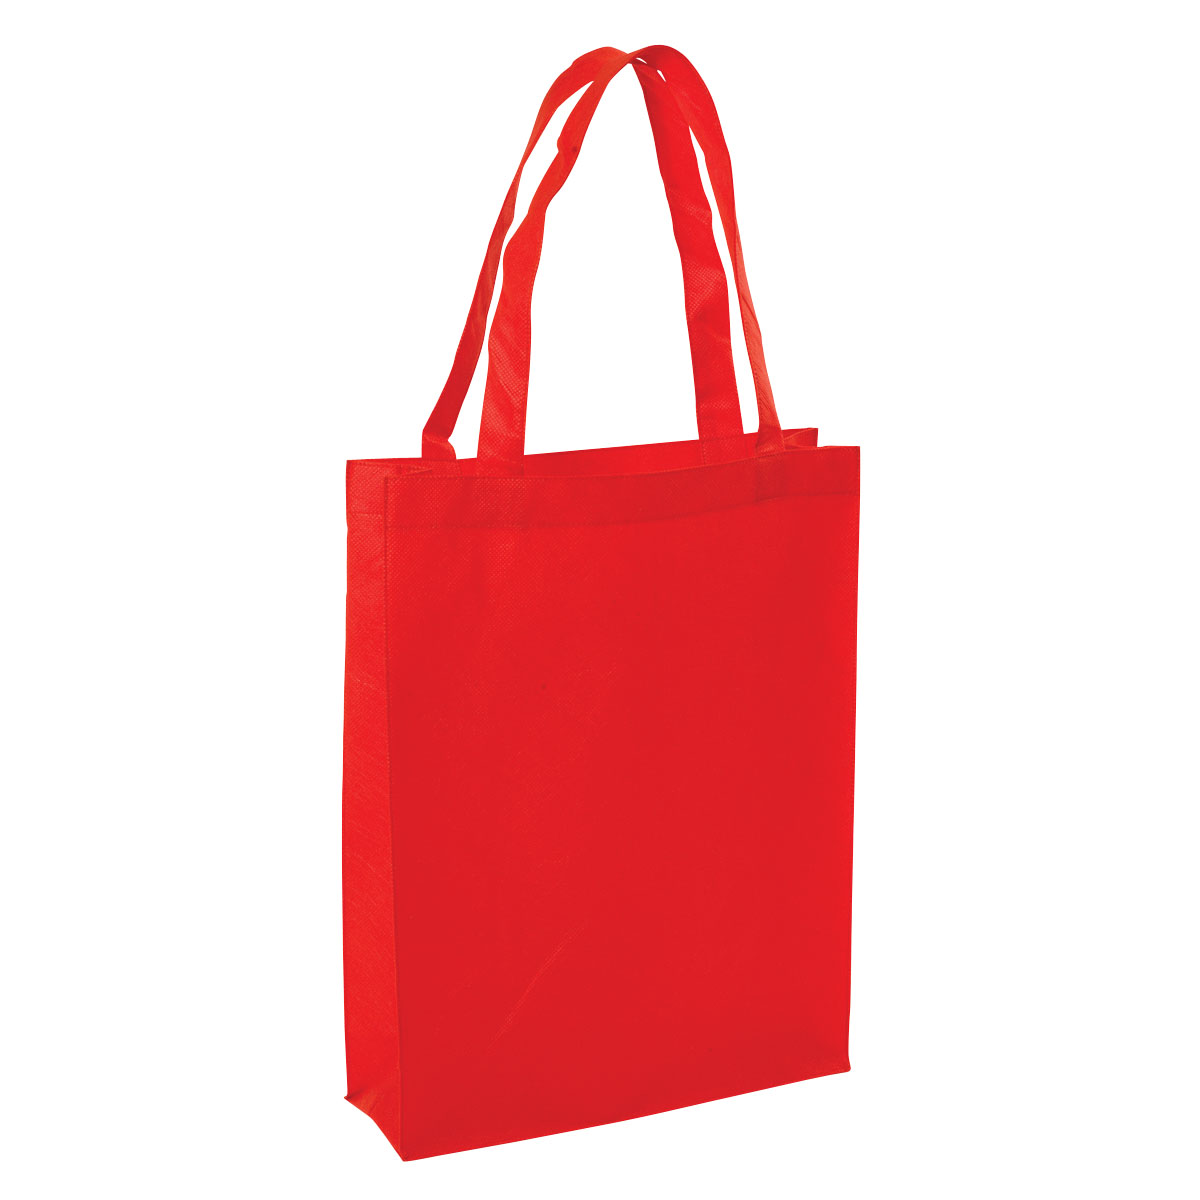 Promotional Non Woven Tote Bags: Branded Online | Promotion Products